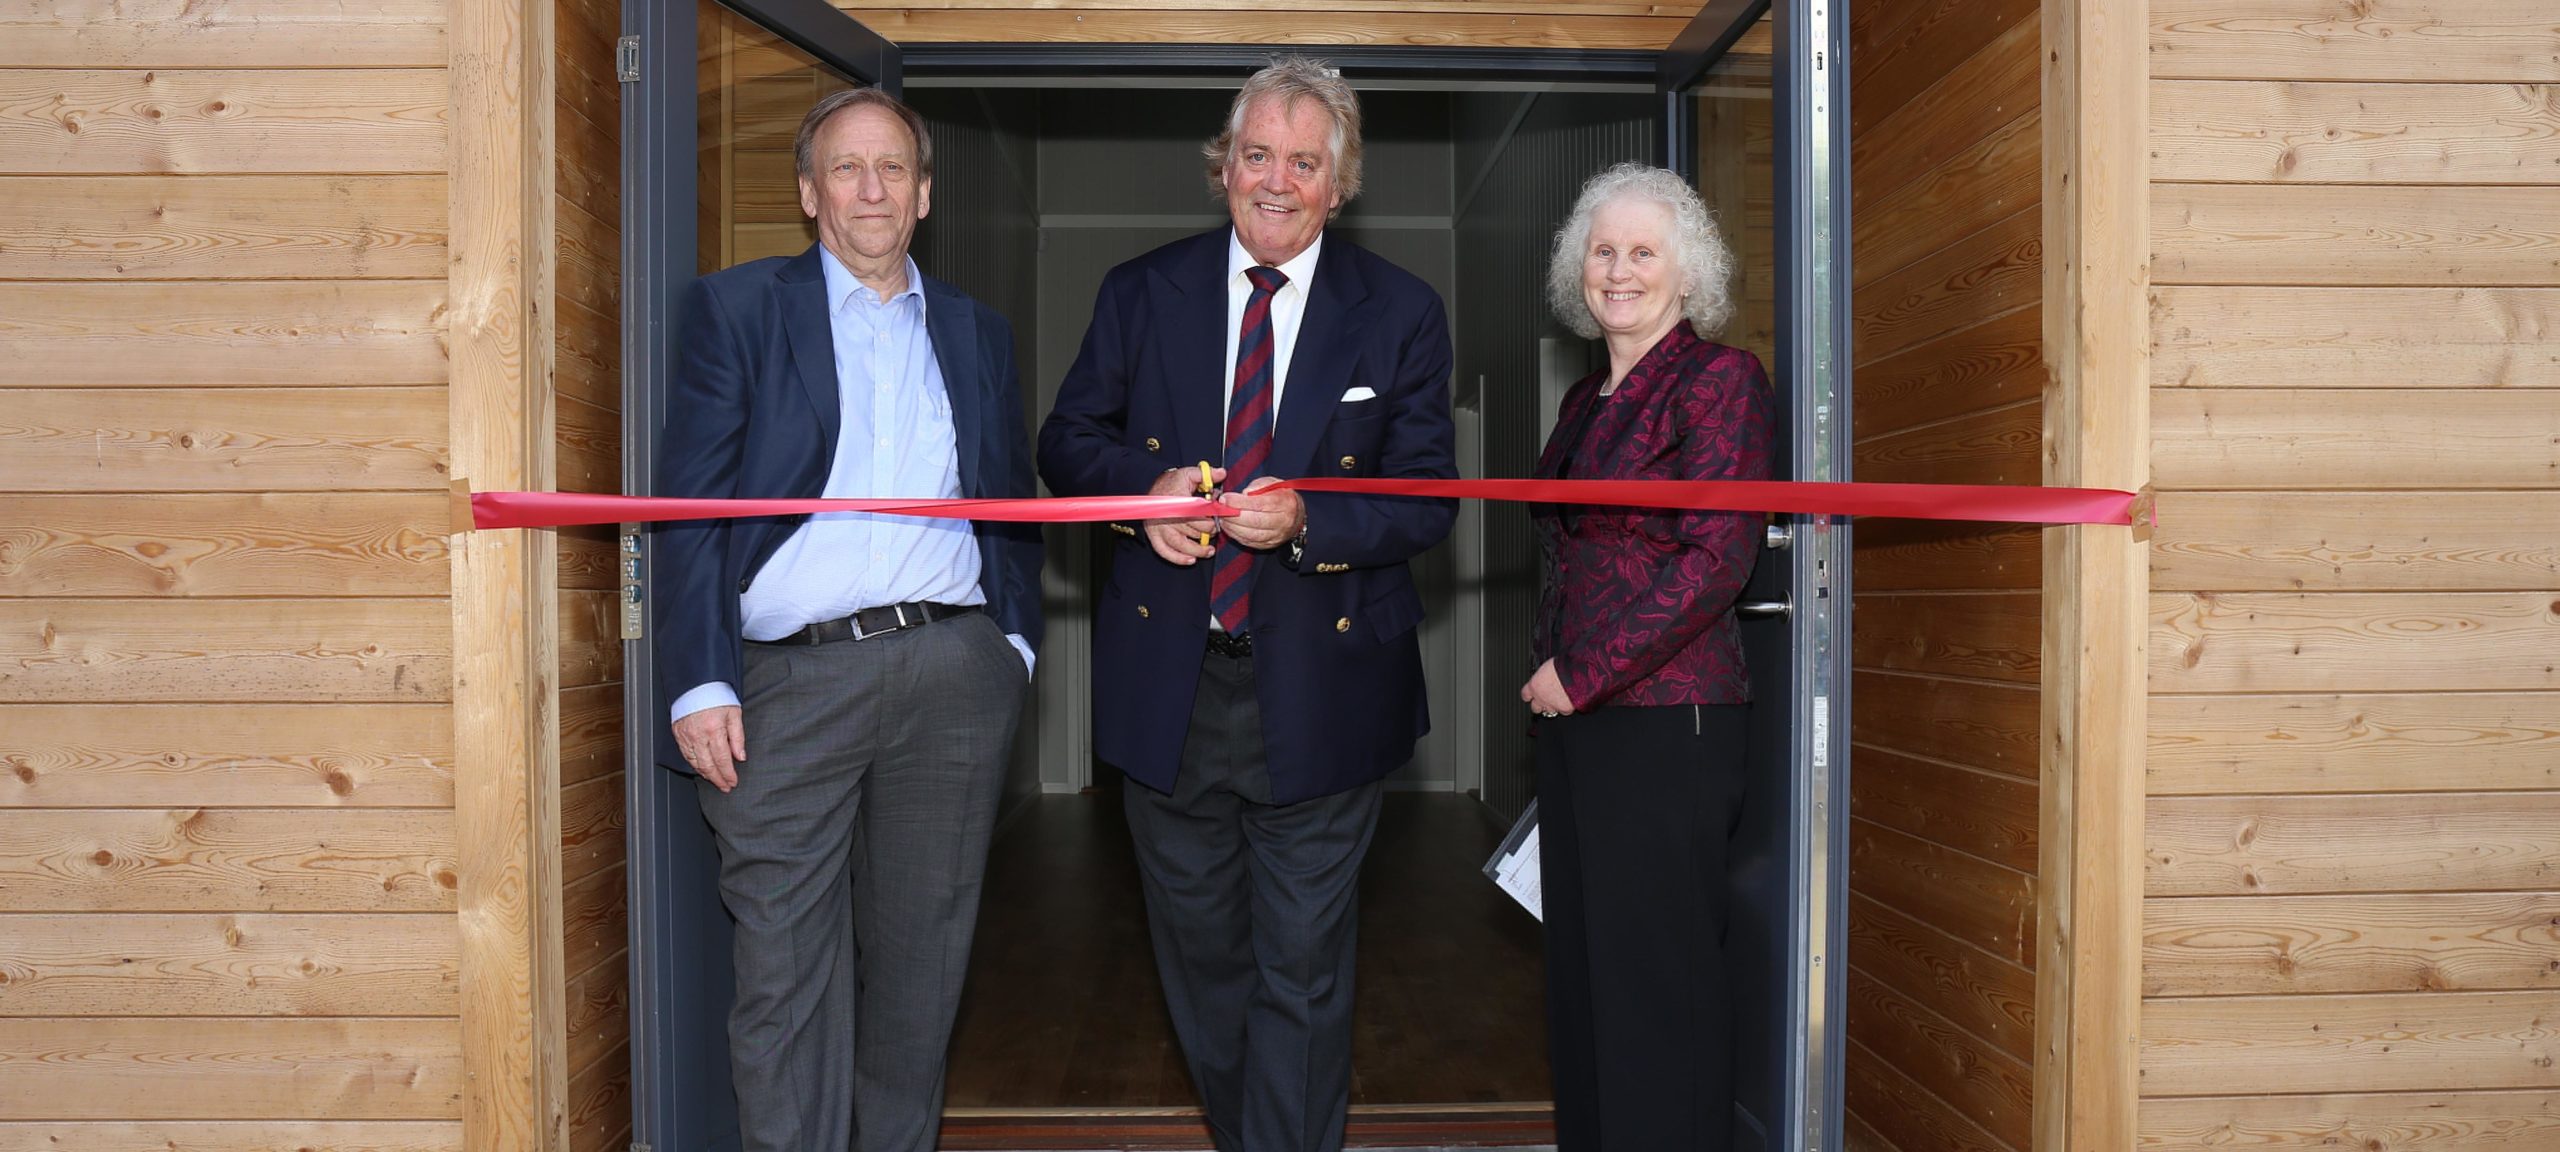 10/05/18. The Duke Of Marlborough officially opens the new Youth Club in Woodstock. L-R: Olaf Eklo (MD of Nordic Wood), Ann Grant (secretary of the Youth Club), The Duke of Marlborough, Kami Parnes (Chairperson of the Youth Club).
Picture: John Lawrence/Flamingo